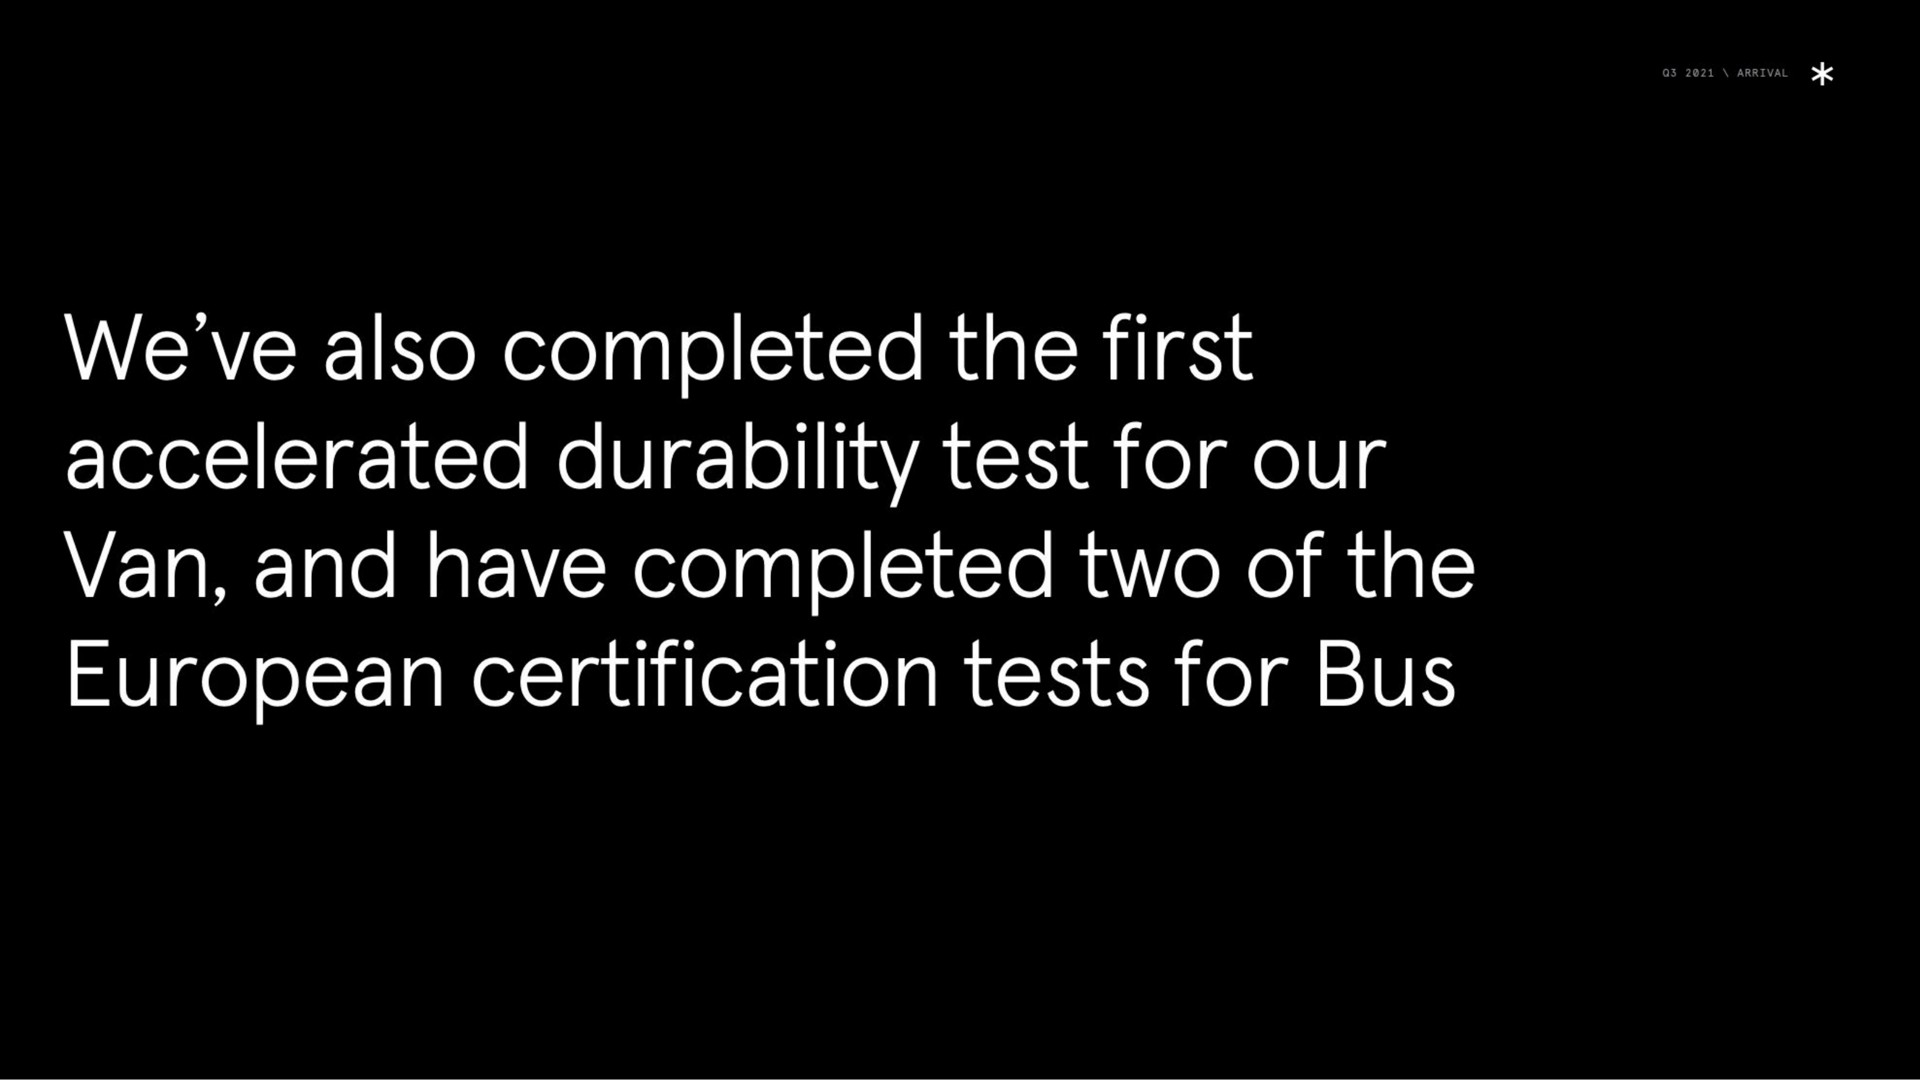 we also completed the first accelerated durability test for our van and have completed two of the certification tests for bus | Arrival